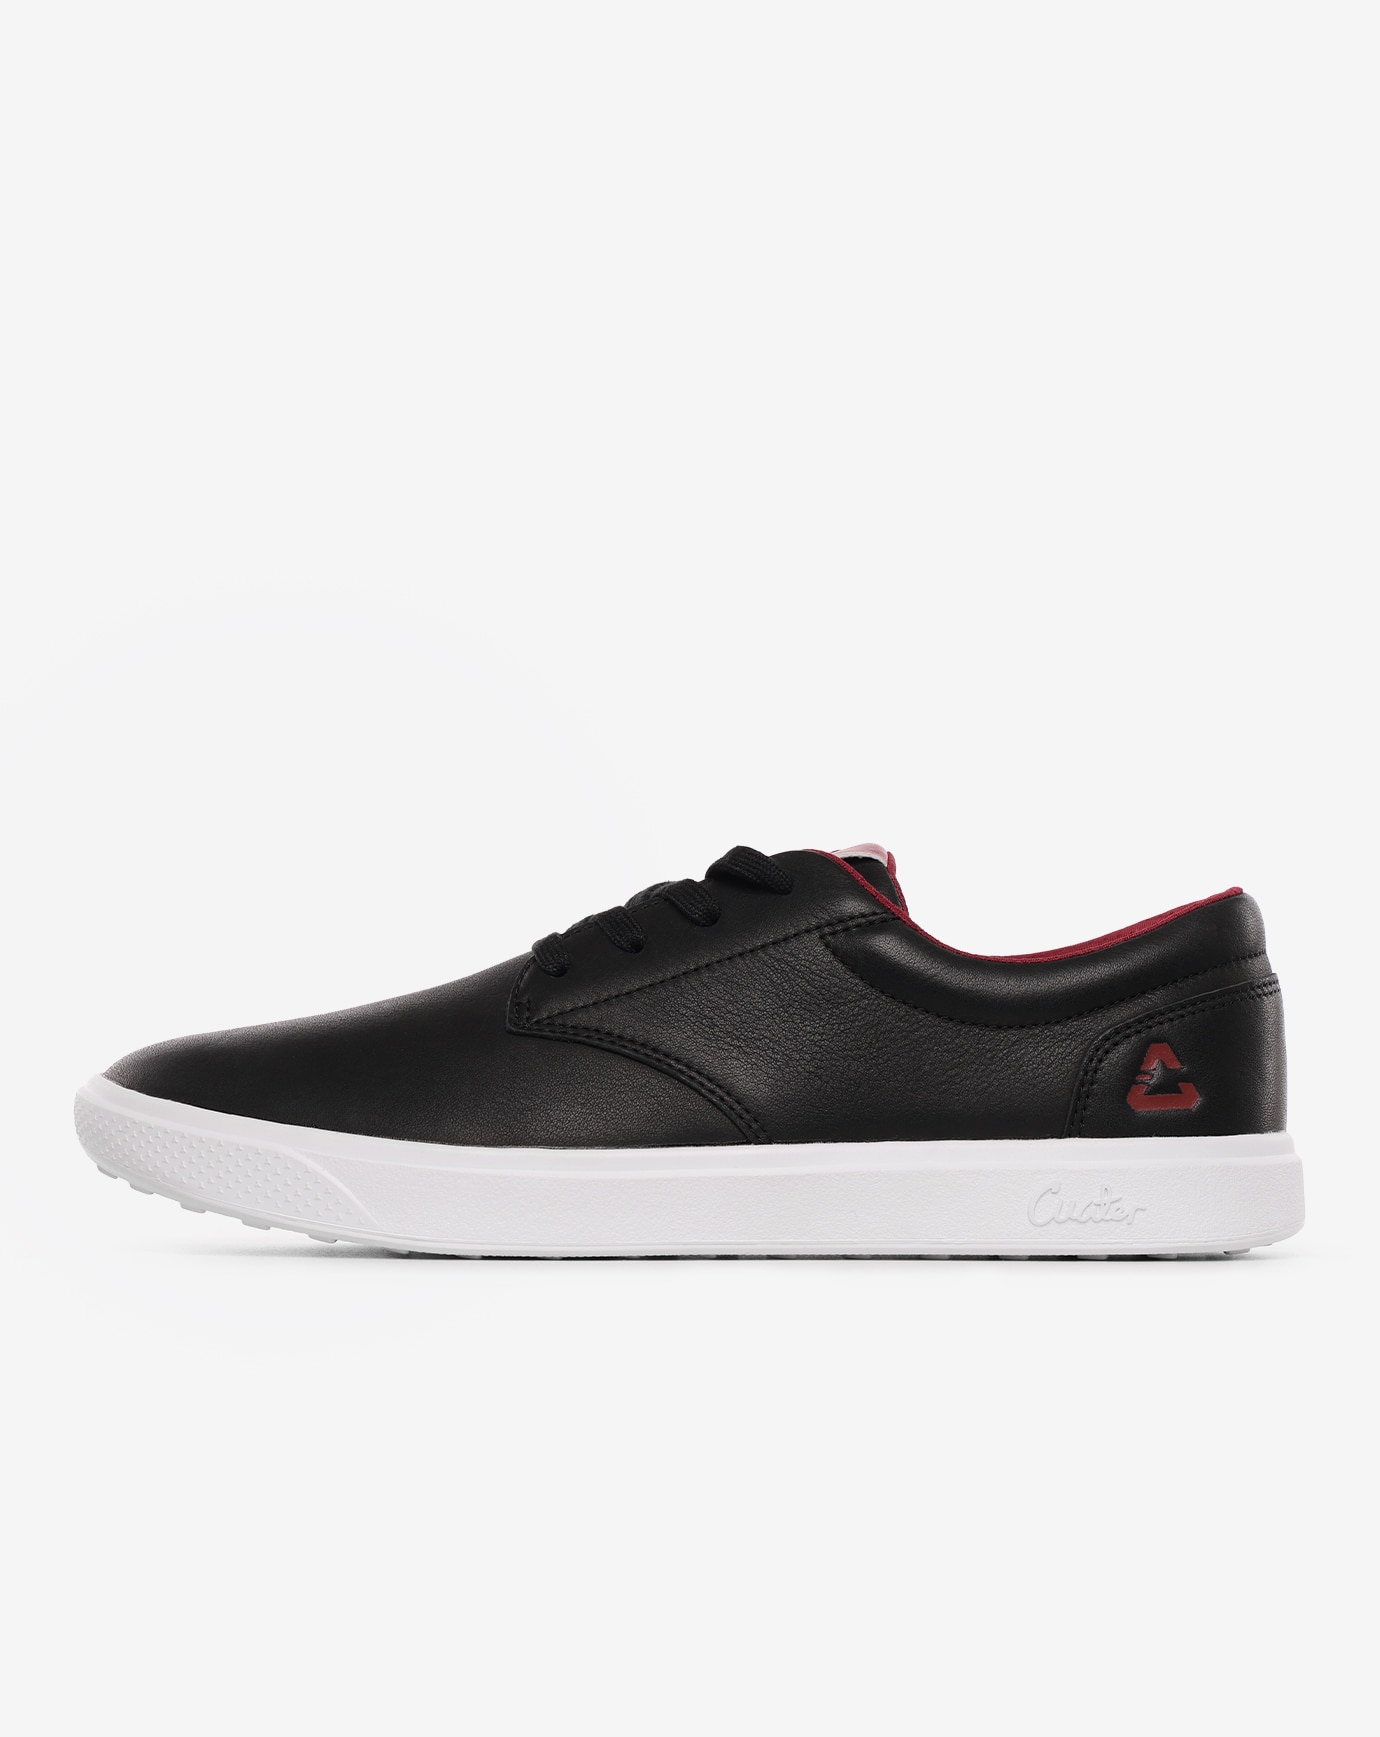 THE WILDCARD LEATHER SPIKELESS GOLF SHOE Image Thumbnail 1